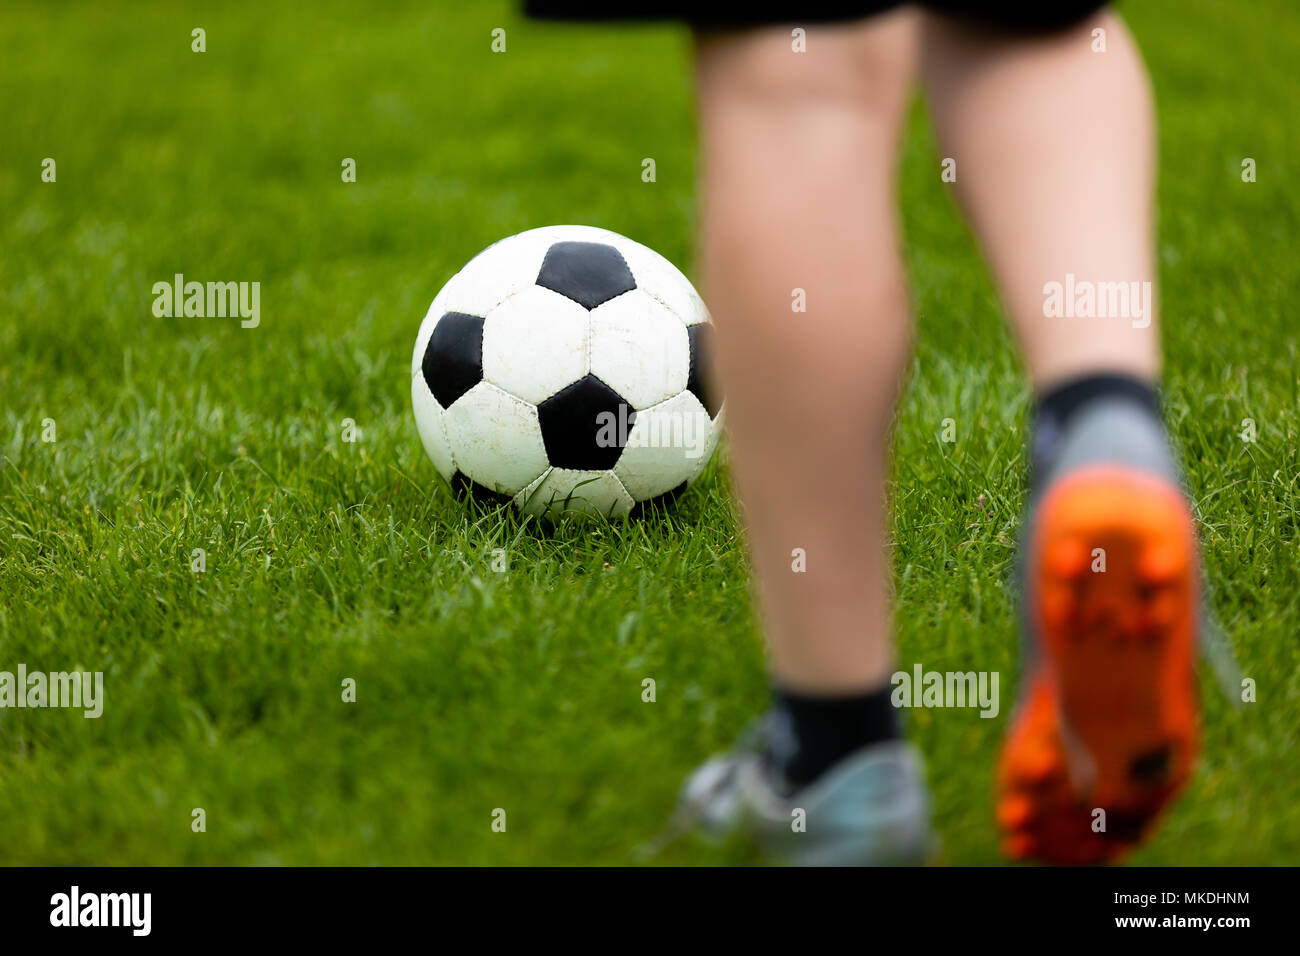 Football Or Soccer Ball At The Kickoff Of A Game Soccer Free Kick At A Grass Pitch Young Soccer Player With Traditional Football Ball Stock Photo Alamy